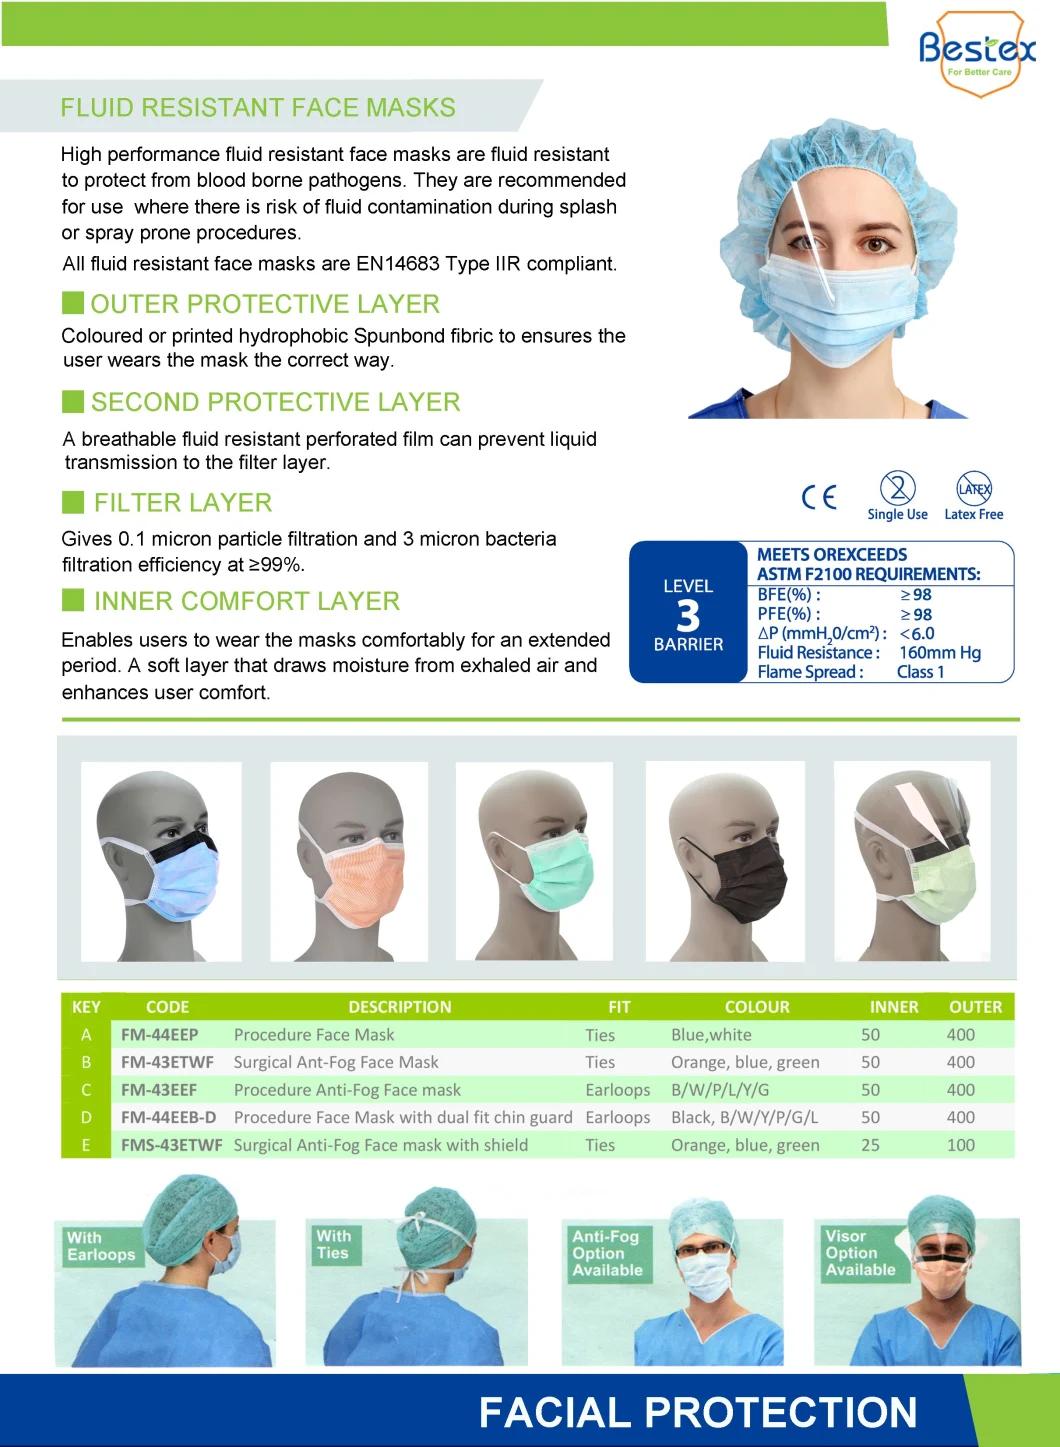 Disposable Face Mask with Eyeshield Anti-Fog and Eye-Protective with Tie on